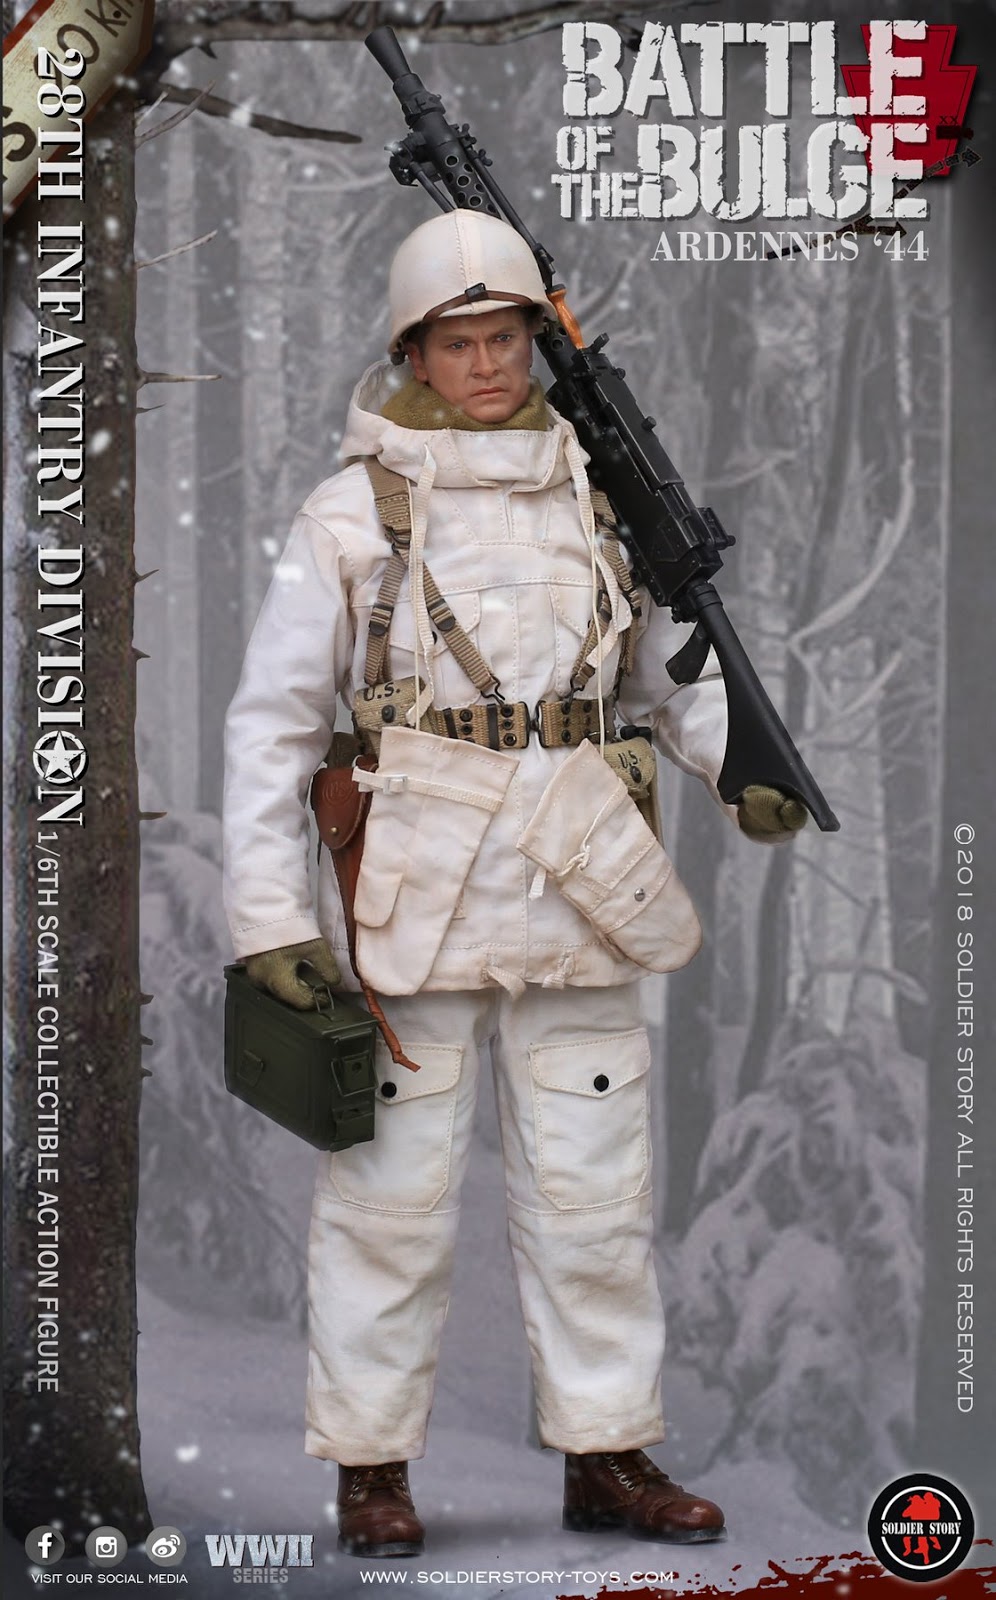 wwii - NEW PRODUCT: Soldier Story: 1/6 scale U.S. Army 28th Infantry Division Ardennes 1944 Bulge010